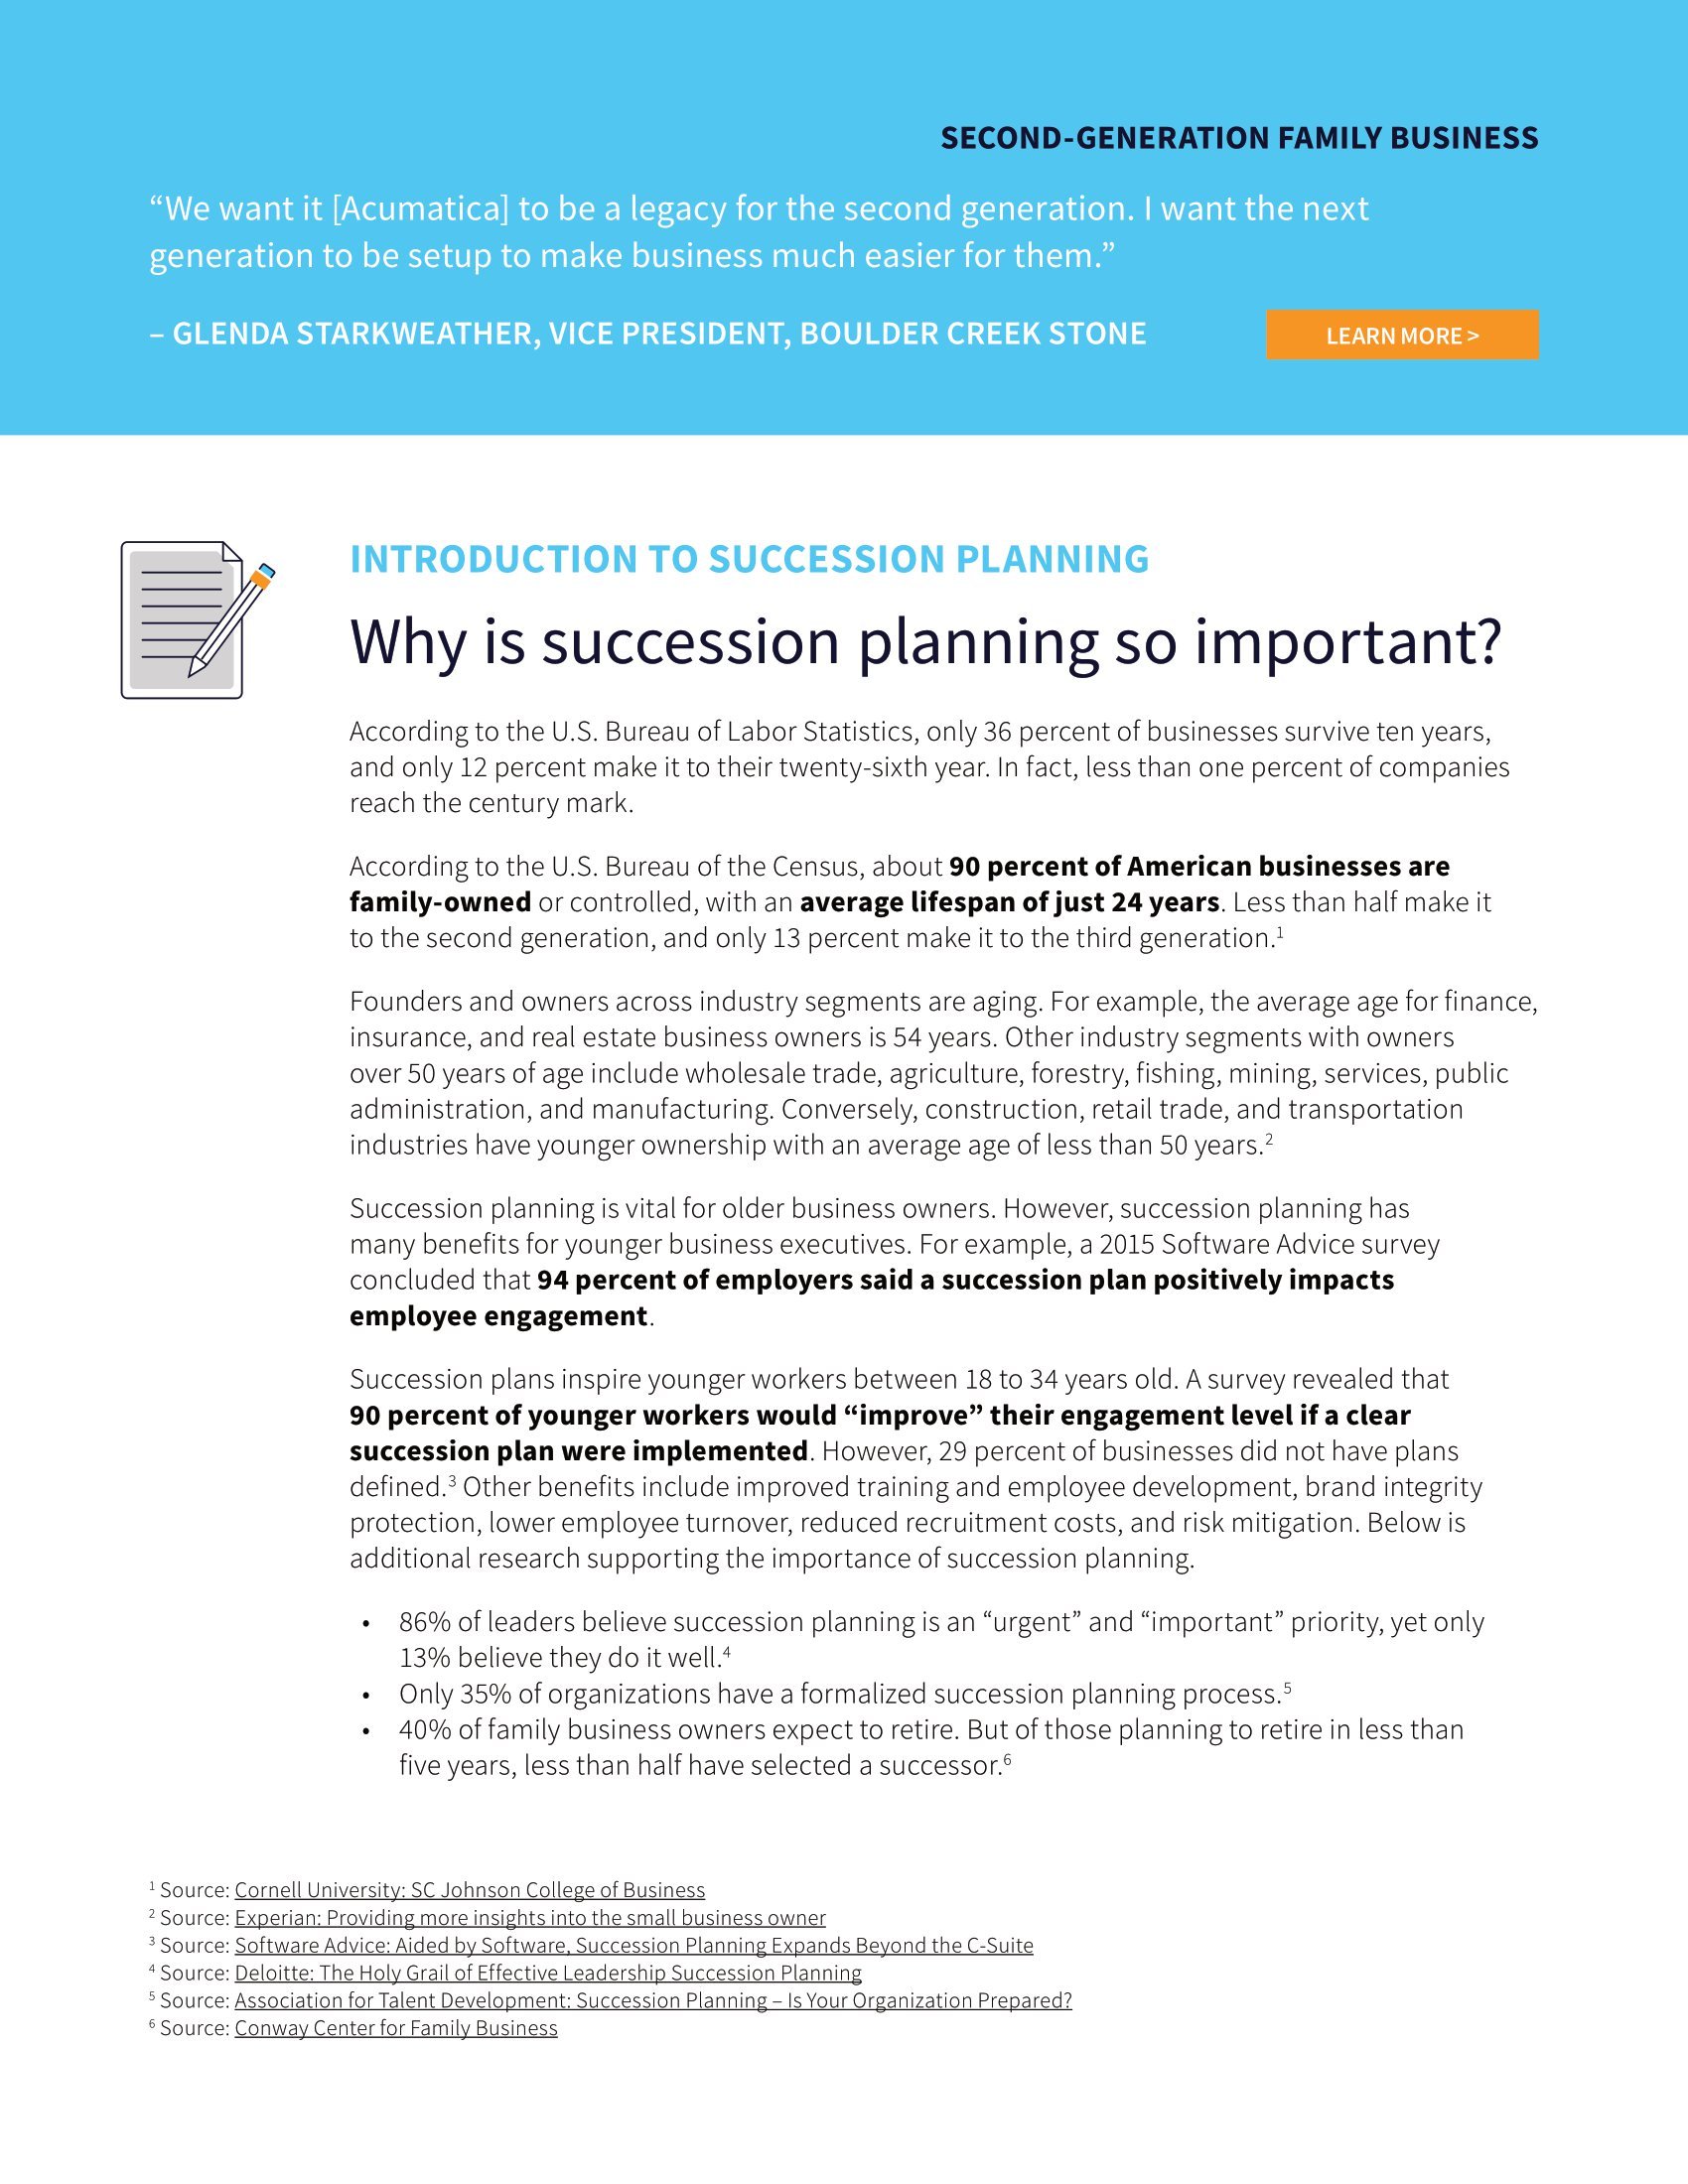 Why Succession Planning is So Important (and How to Do It Right), page 1